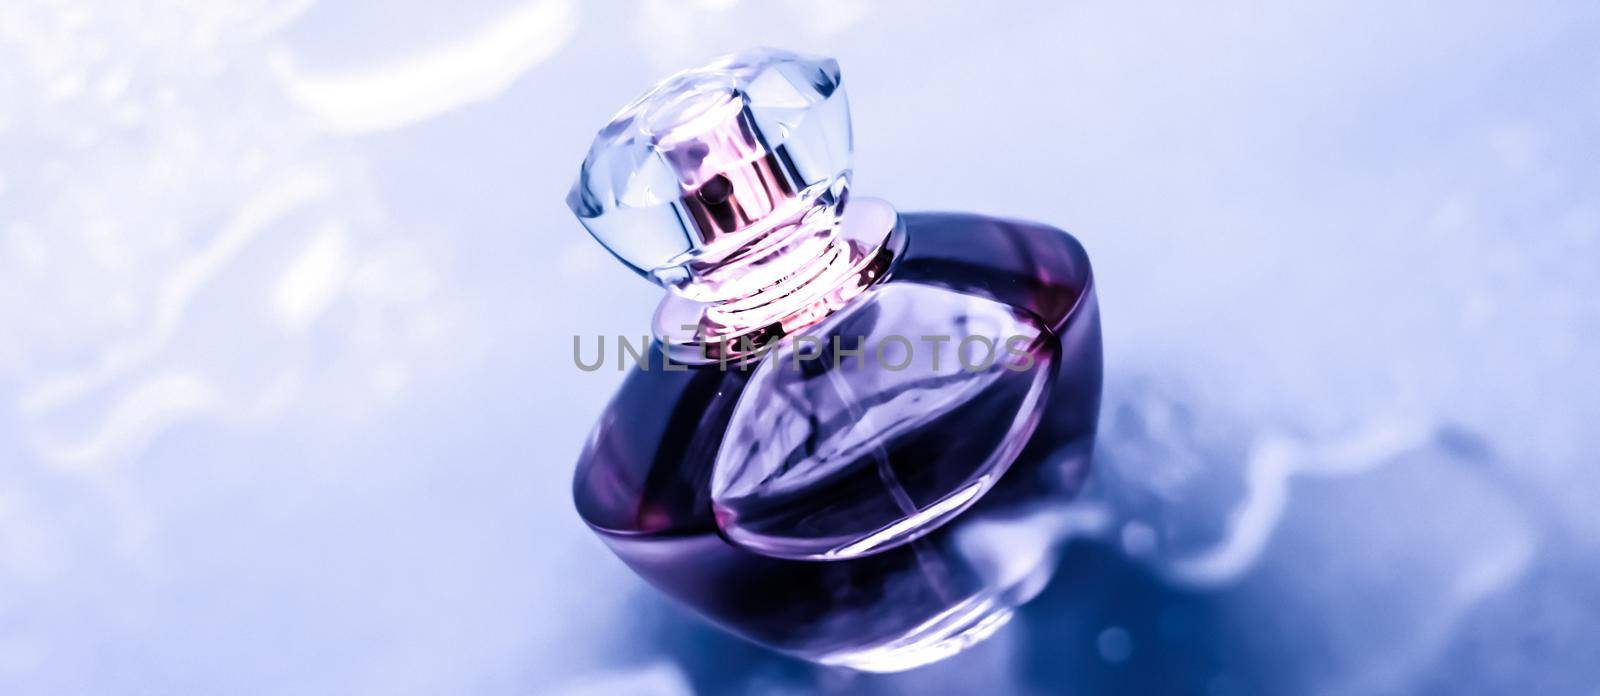 Perfume bottle under purple water, fresh sea coastal scent as glamour fragrance and eau de parfum product as holiday gift, luxury beauty spa brand present by Anneleven